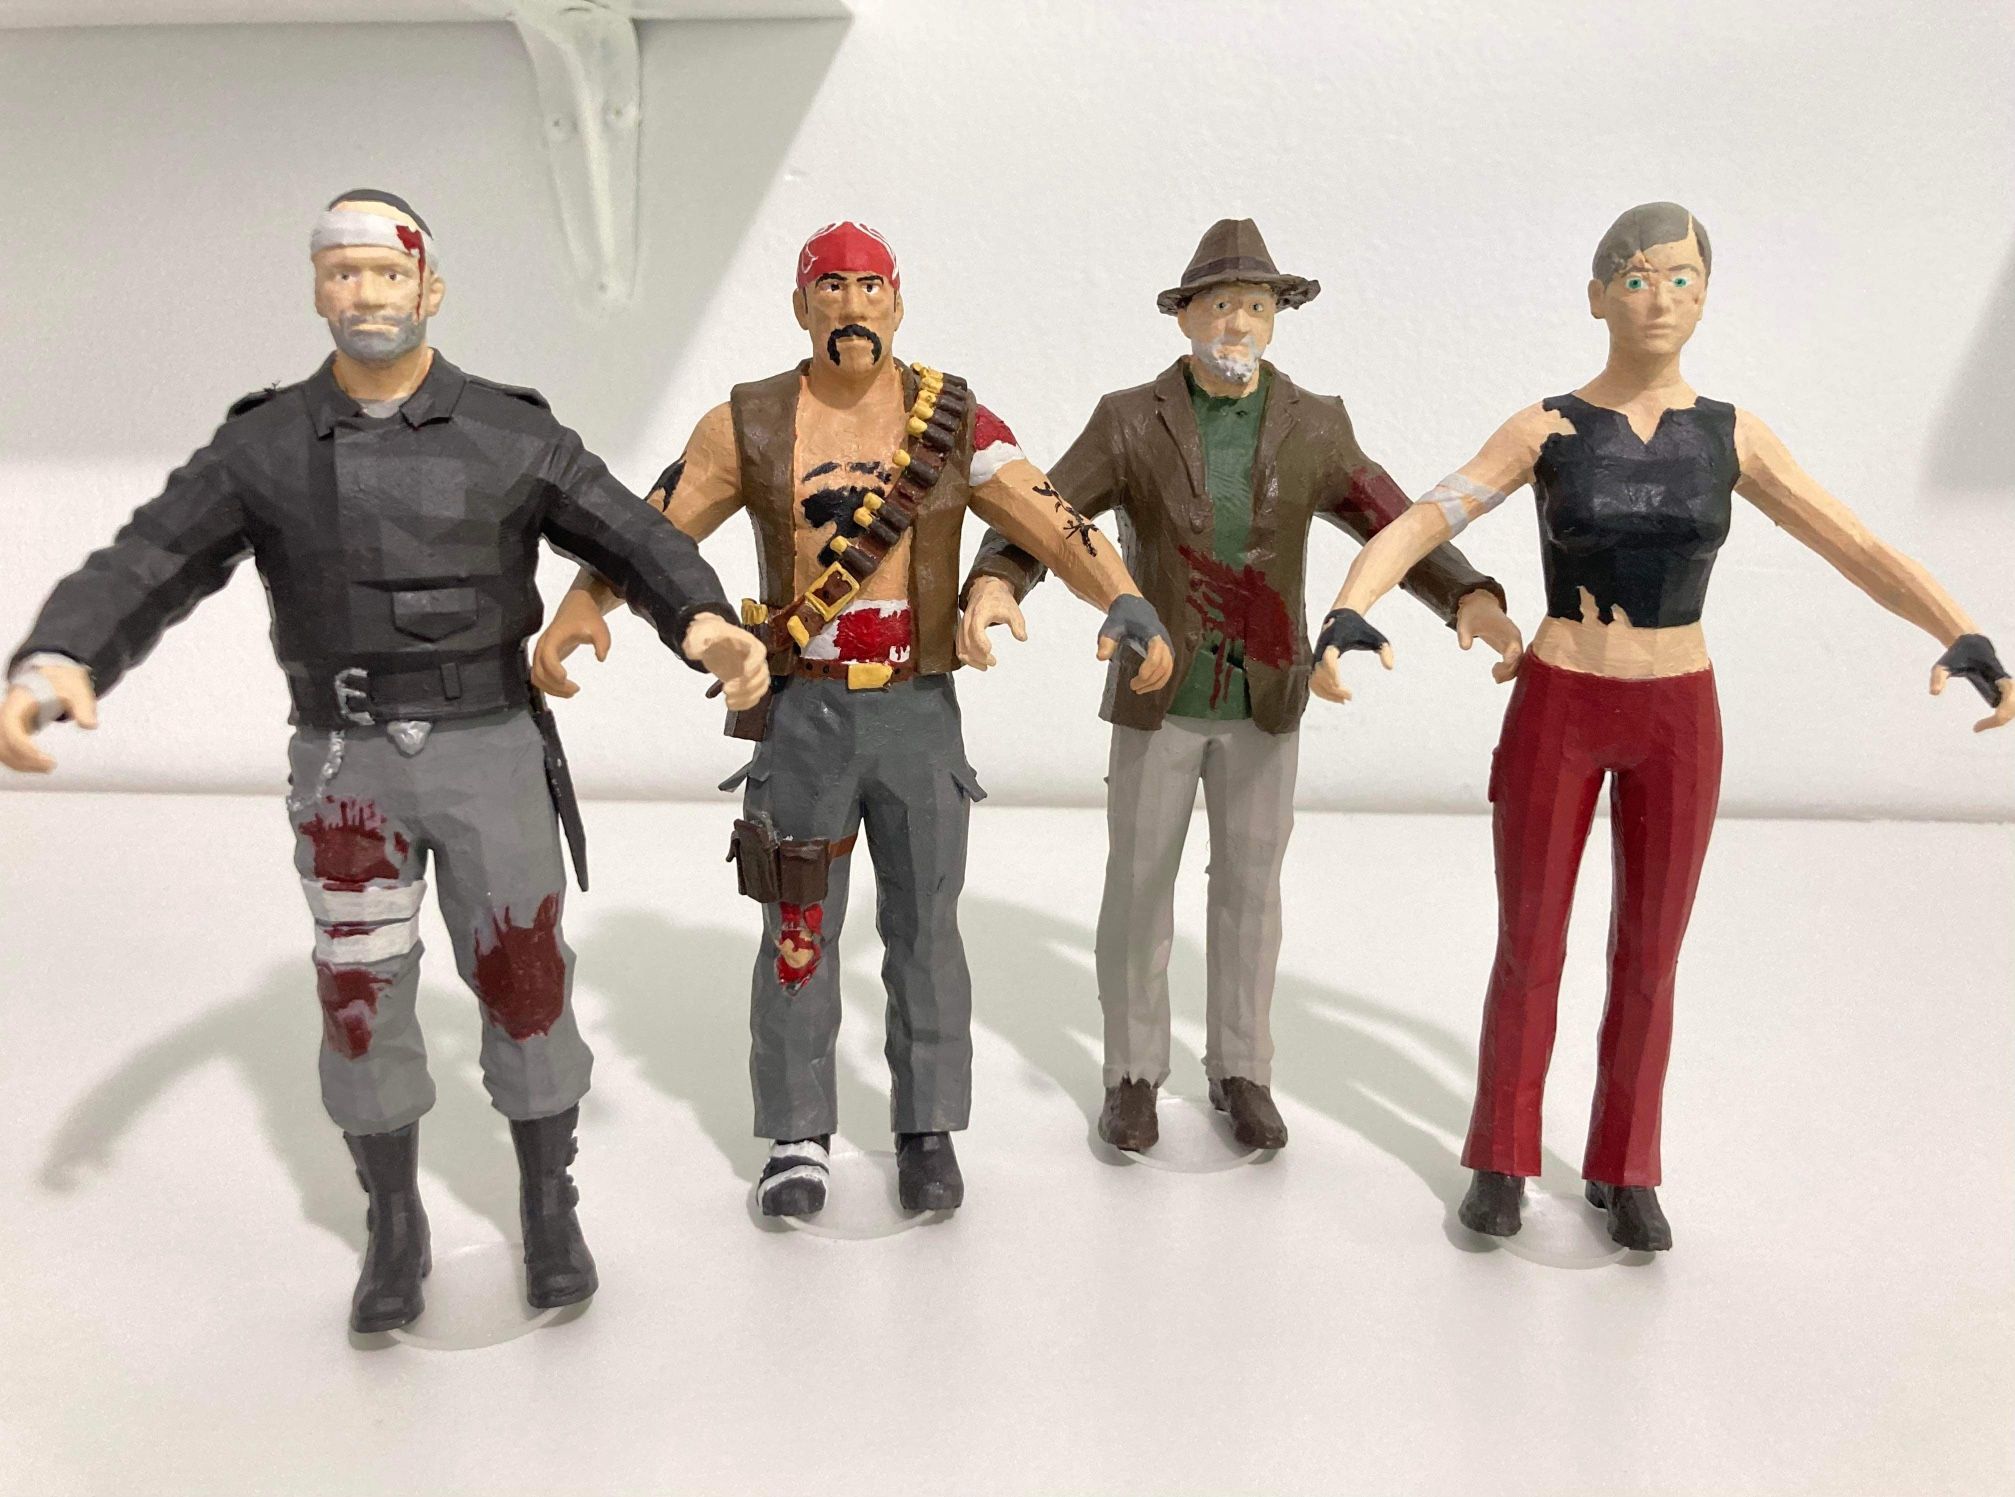 Call Of Duty Black Ops Zombies Figures Lot (Call of the Dead Crew)